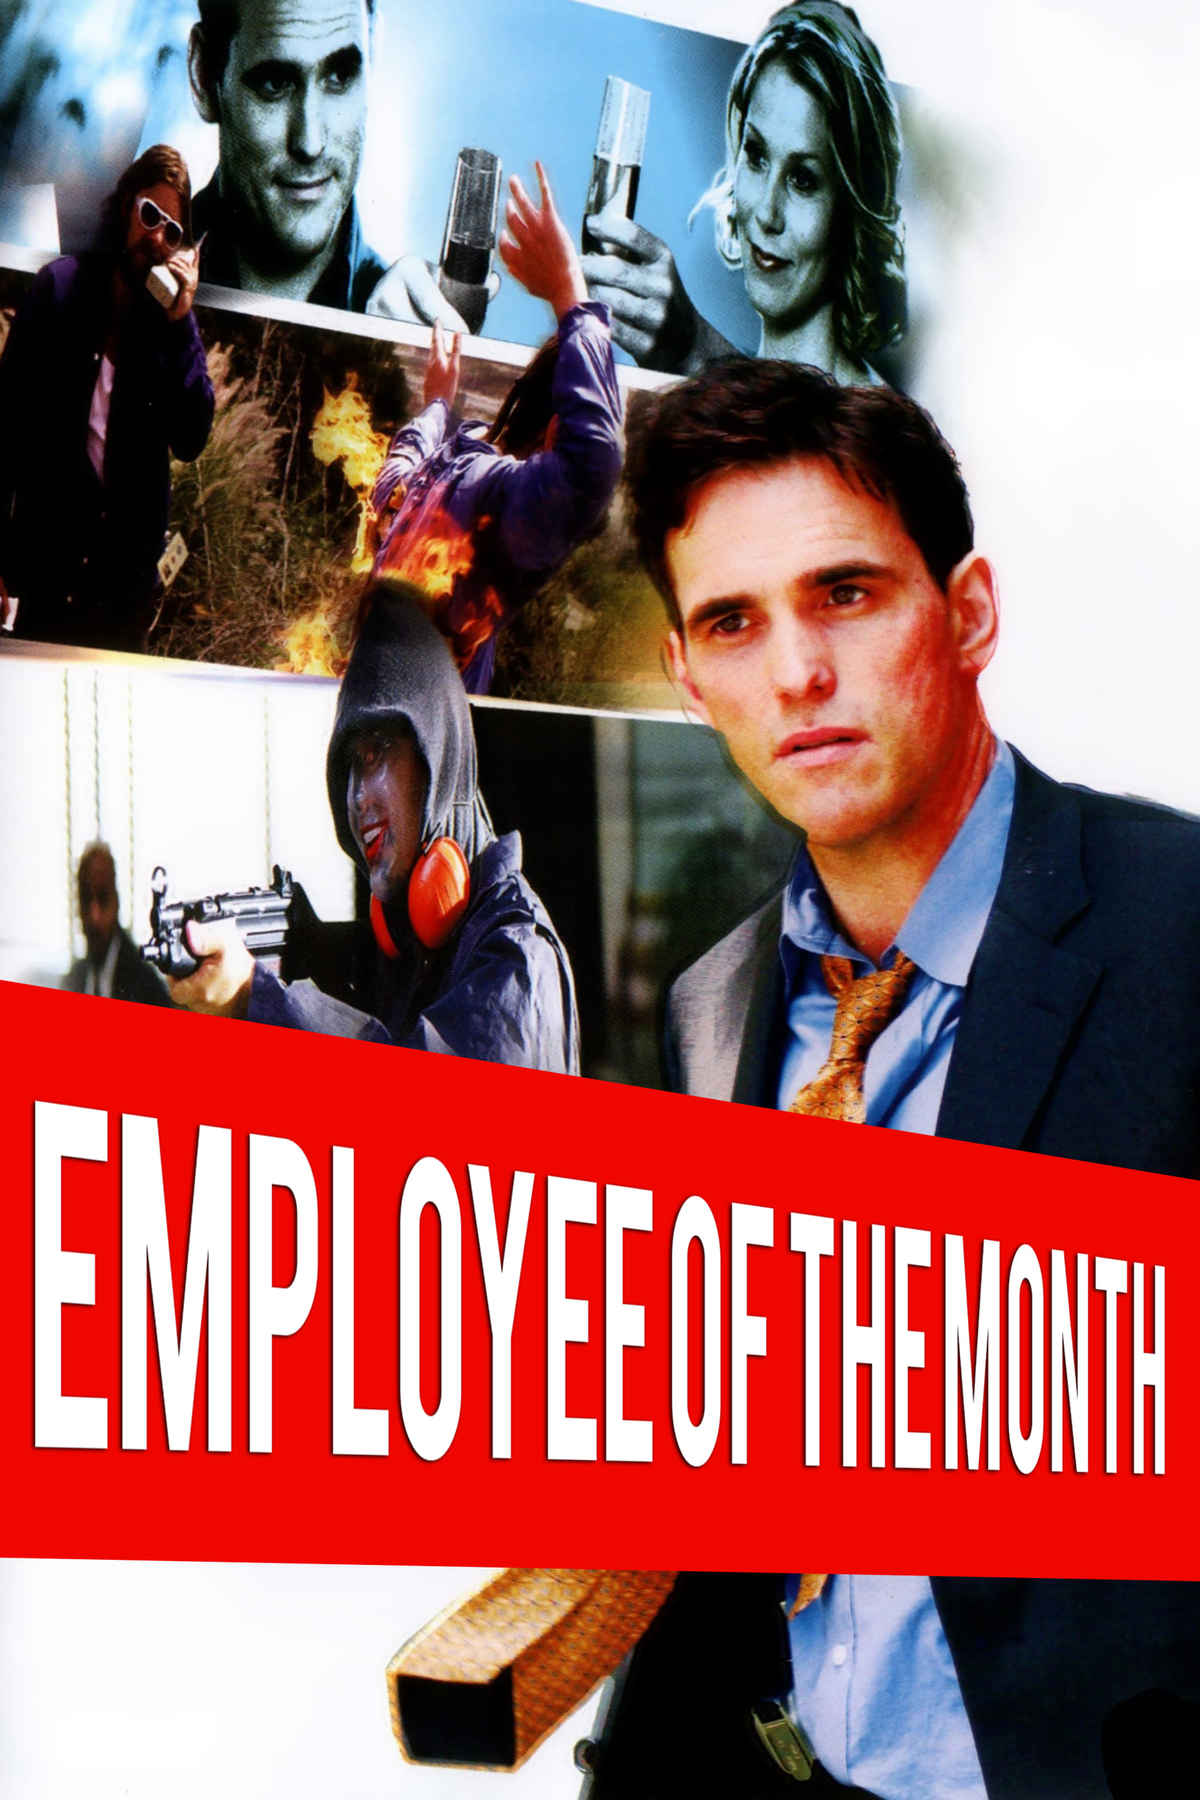 employee-of-the-month-movie-2004-release-date-cast-trailer-songs